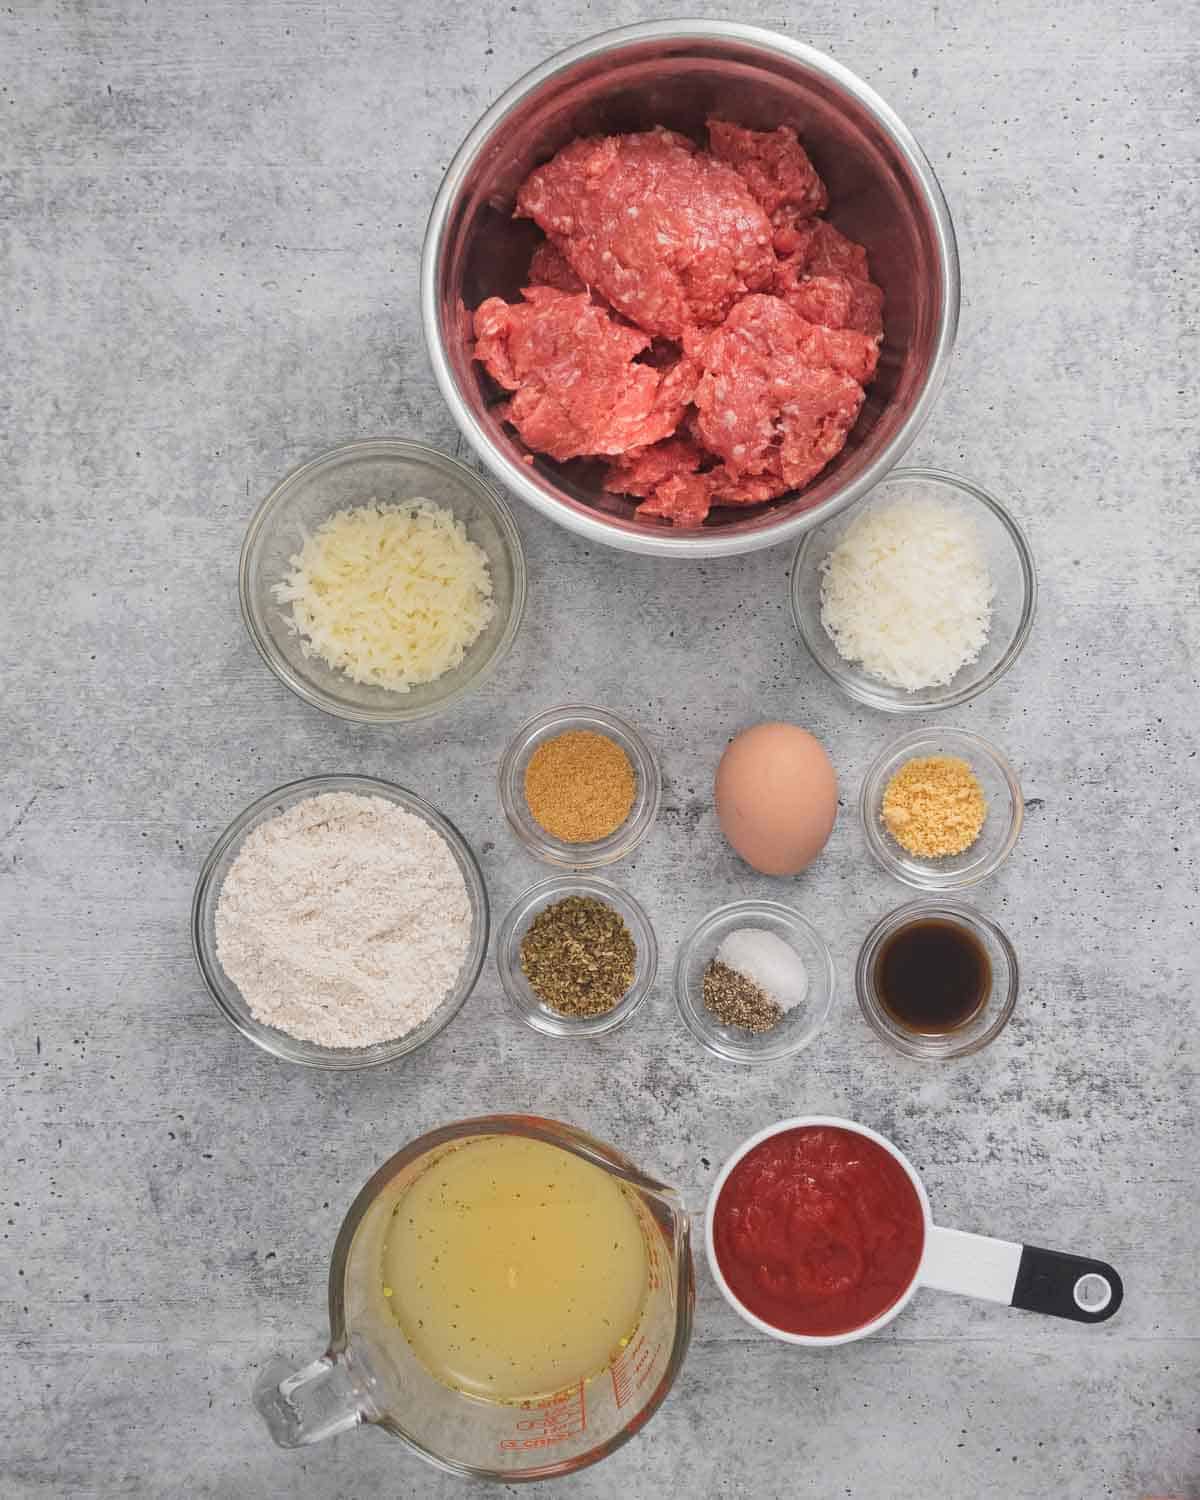 Portioned ingredients to make meatballs.